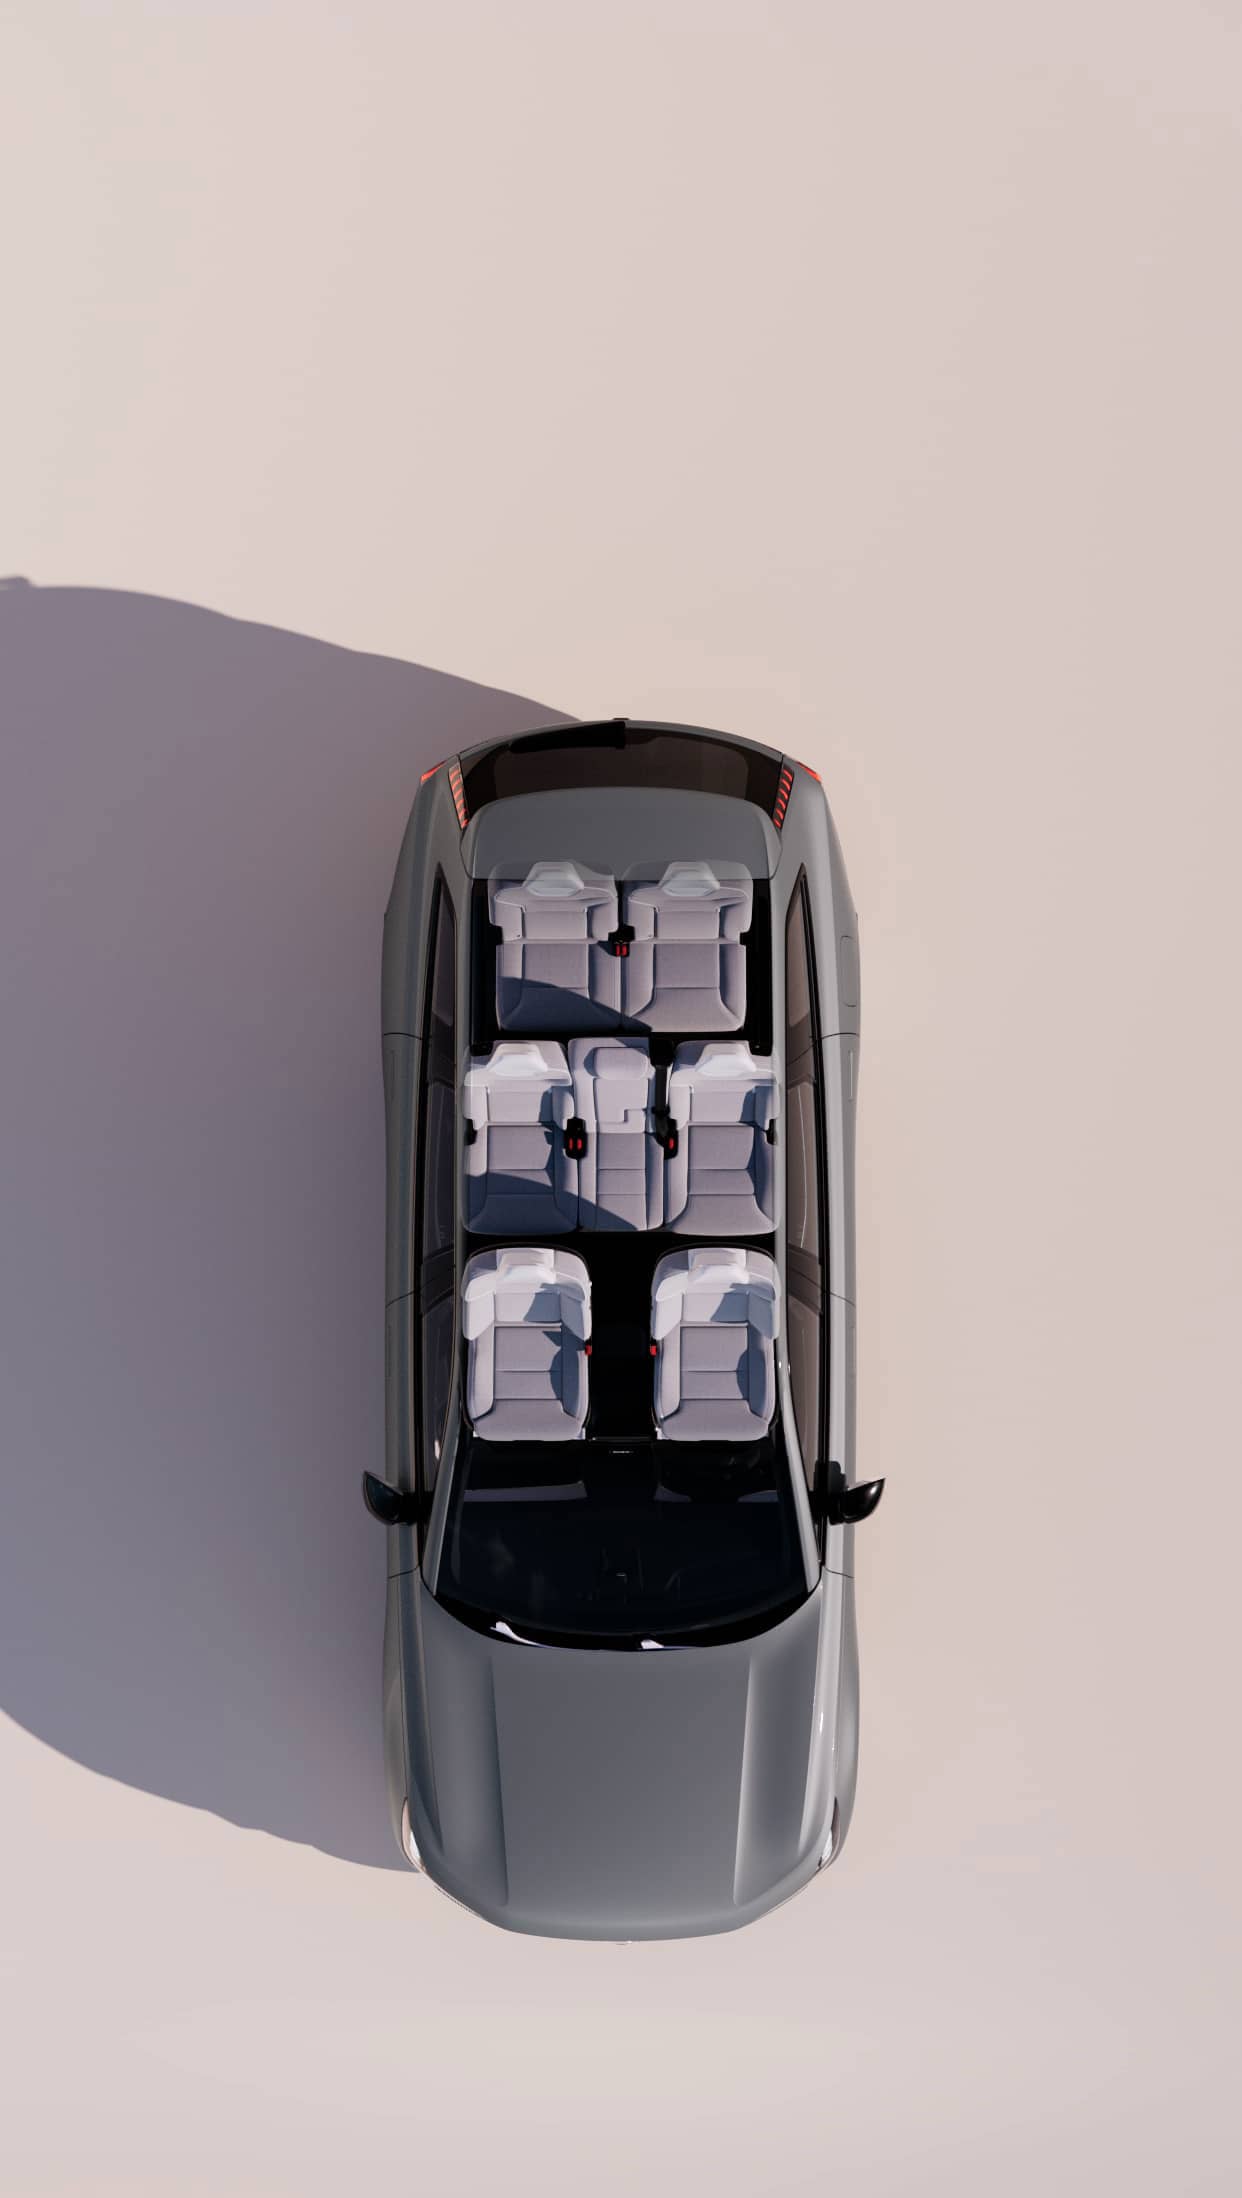 Volvo EX90 panoramic roof from above